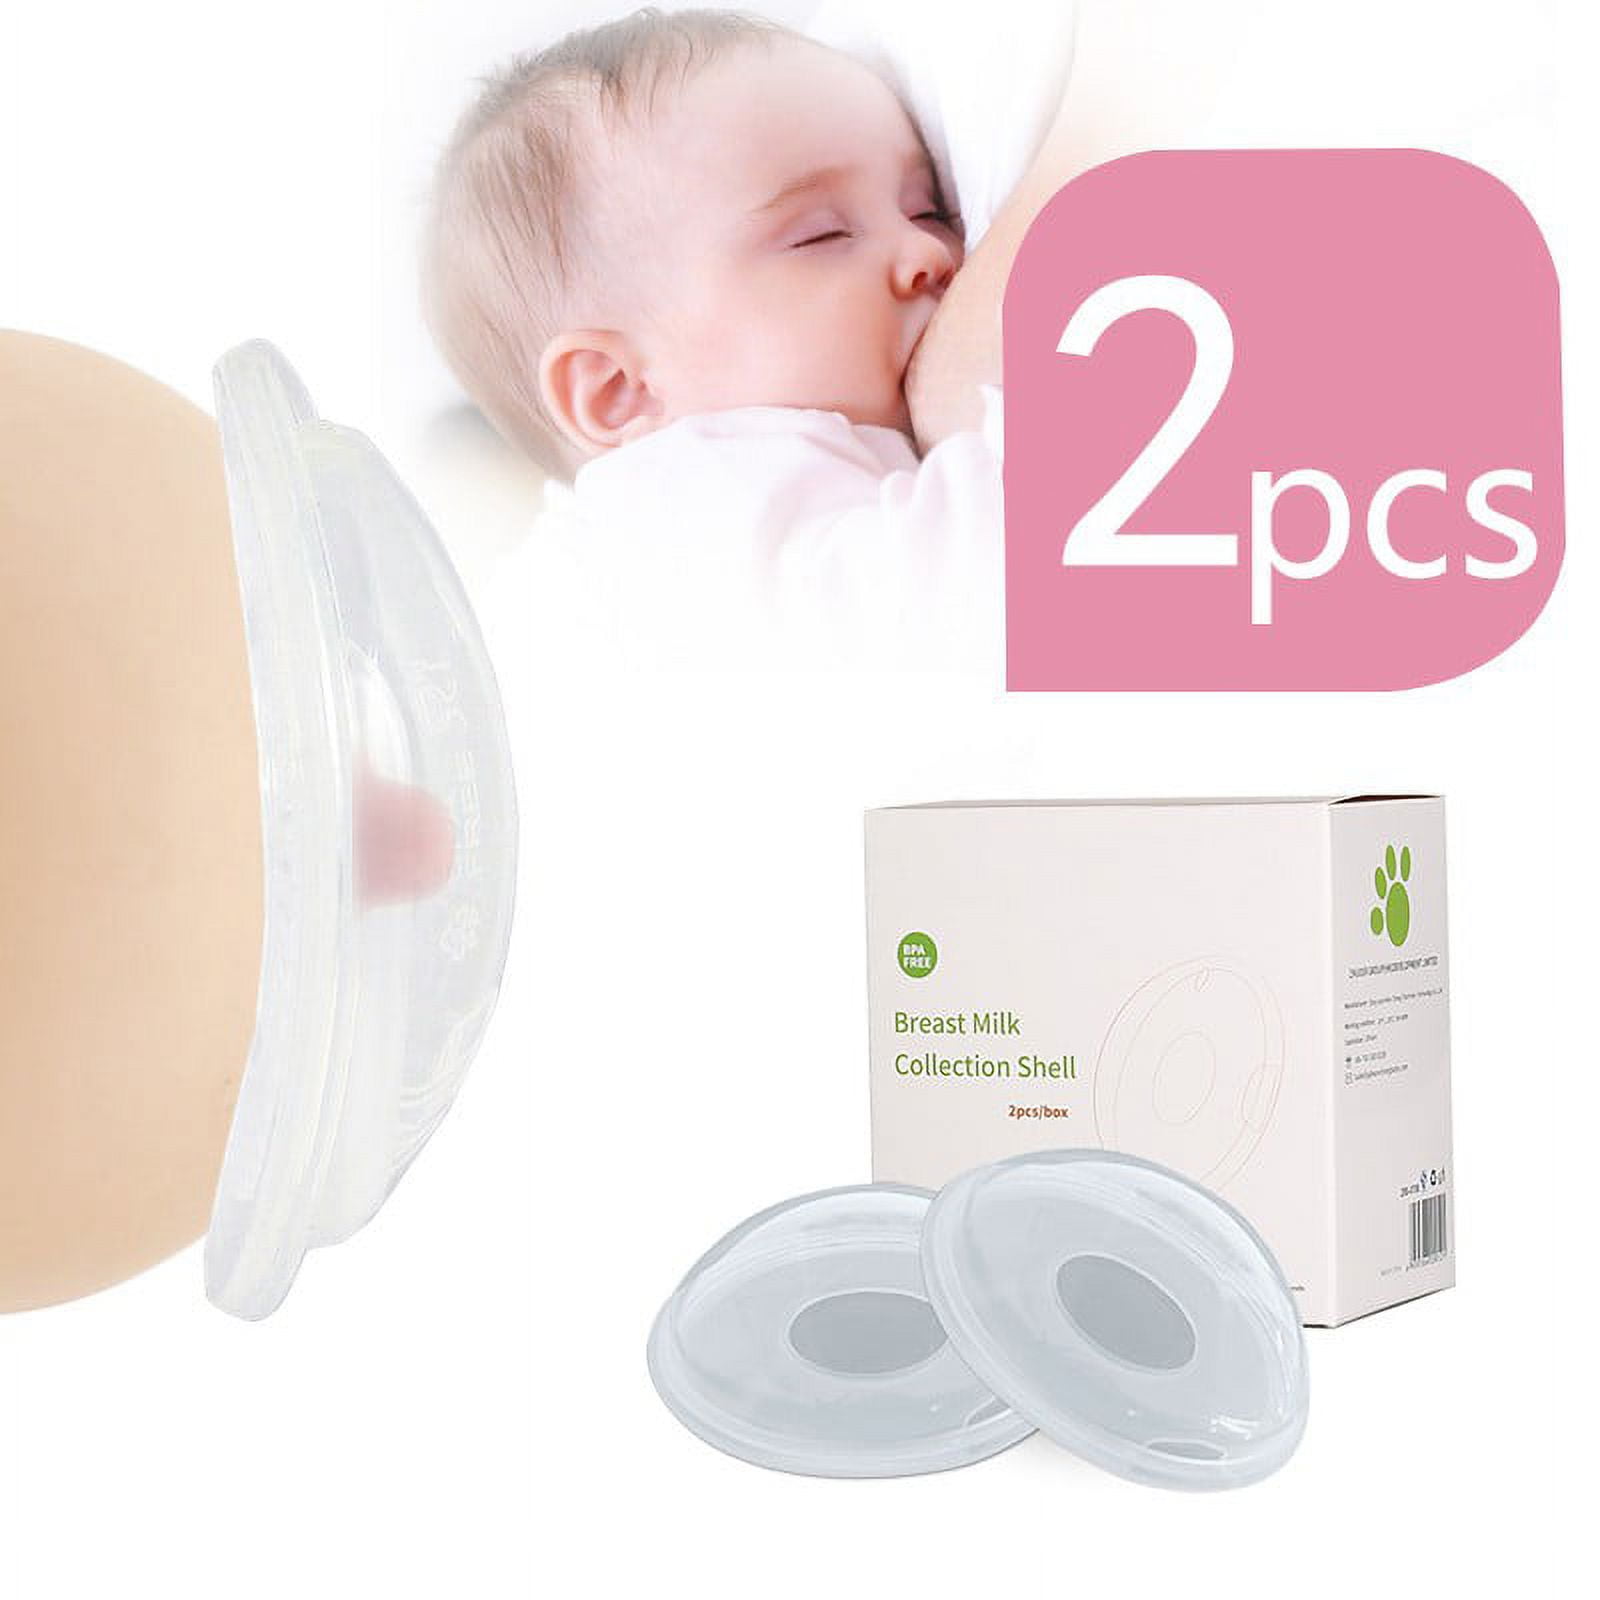 Lictin Milk Collector Catcher for Breastmilk - Breast Shells & Milk Catcher  for Breastfeeding Relief (2 in 1), Protect Sore Nipples for Breastfeeding